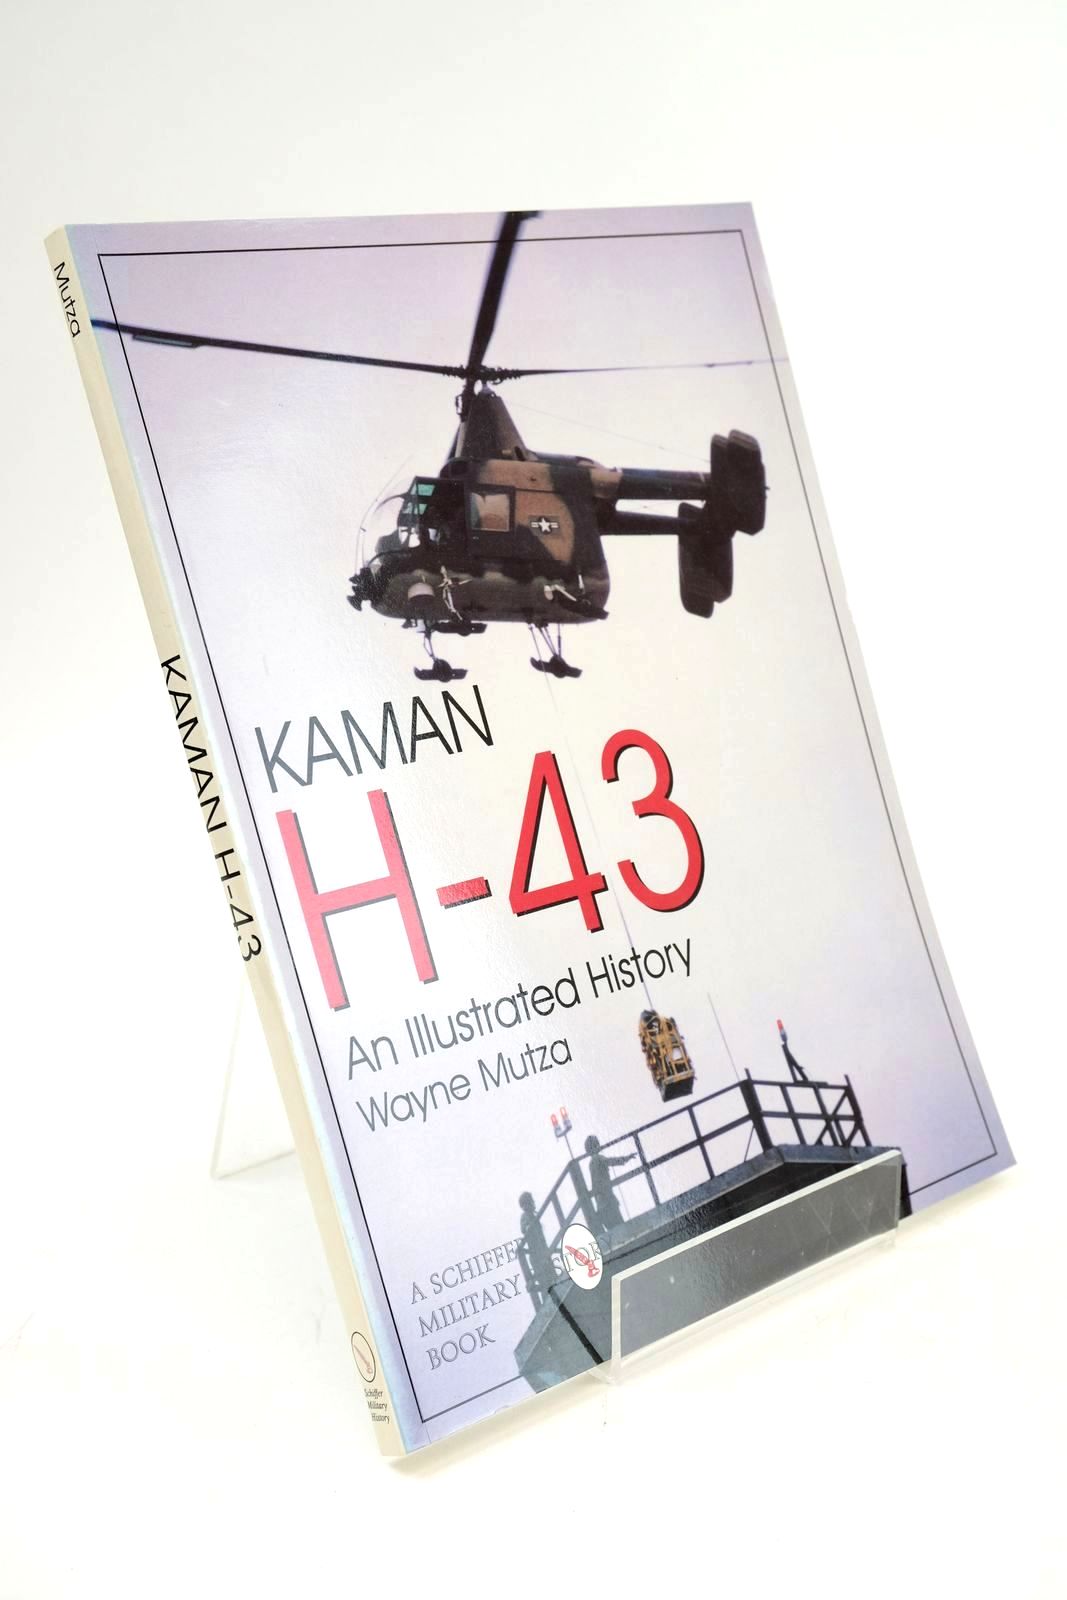 Photo of KAMAN H-43 AN ILLUSTRATED HISTORY written by Mutza, Wayne published by Schiffer Publishing Ltd. (STOCK CODE: 1325144)  for sale by Stella & Rose's Books